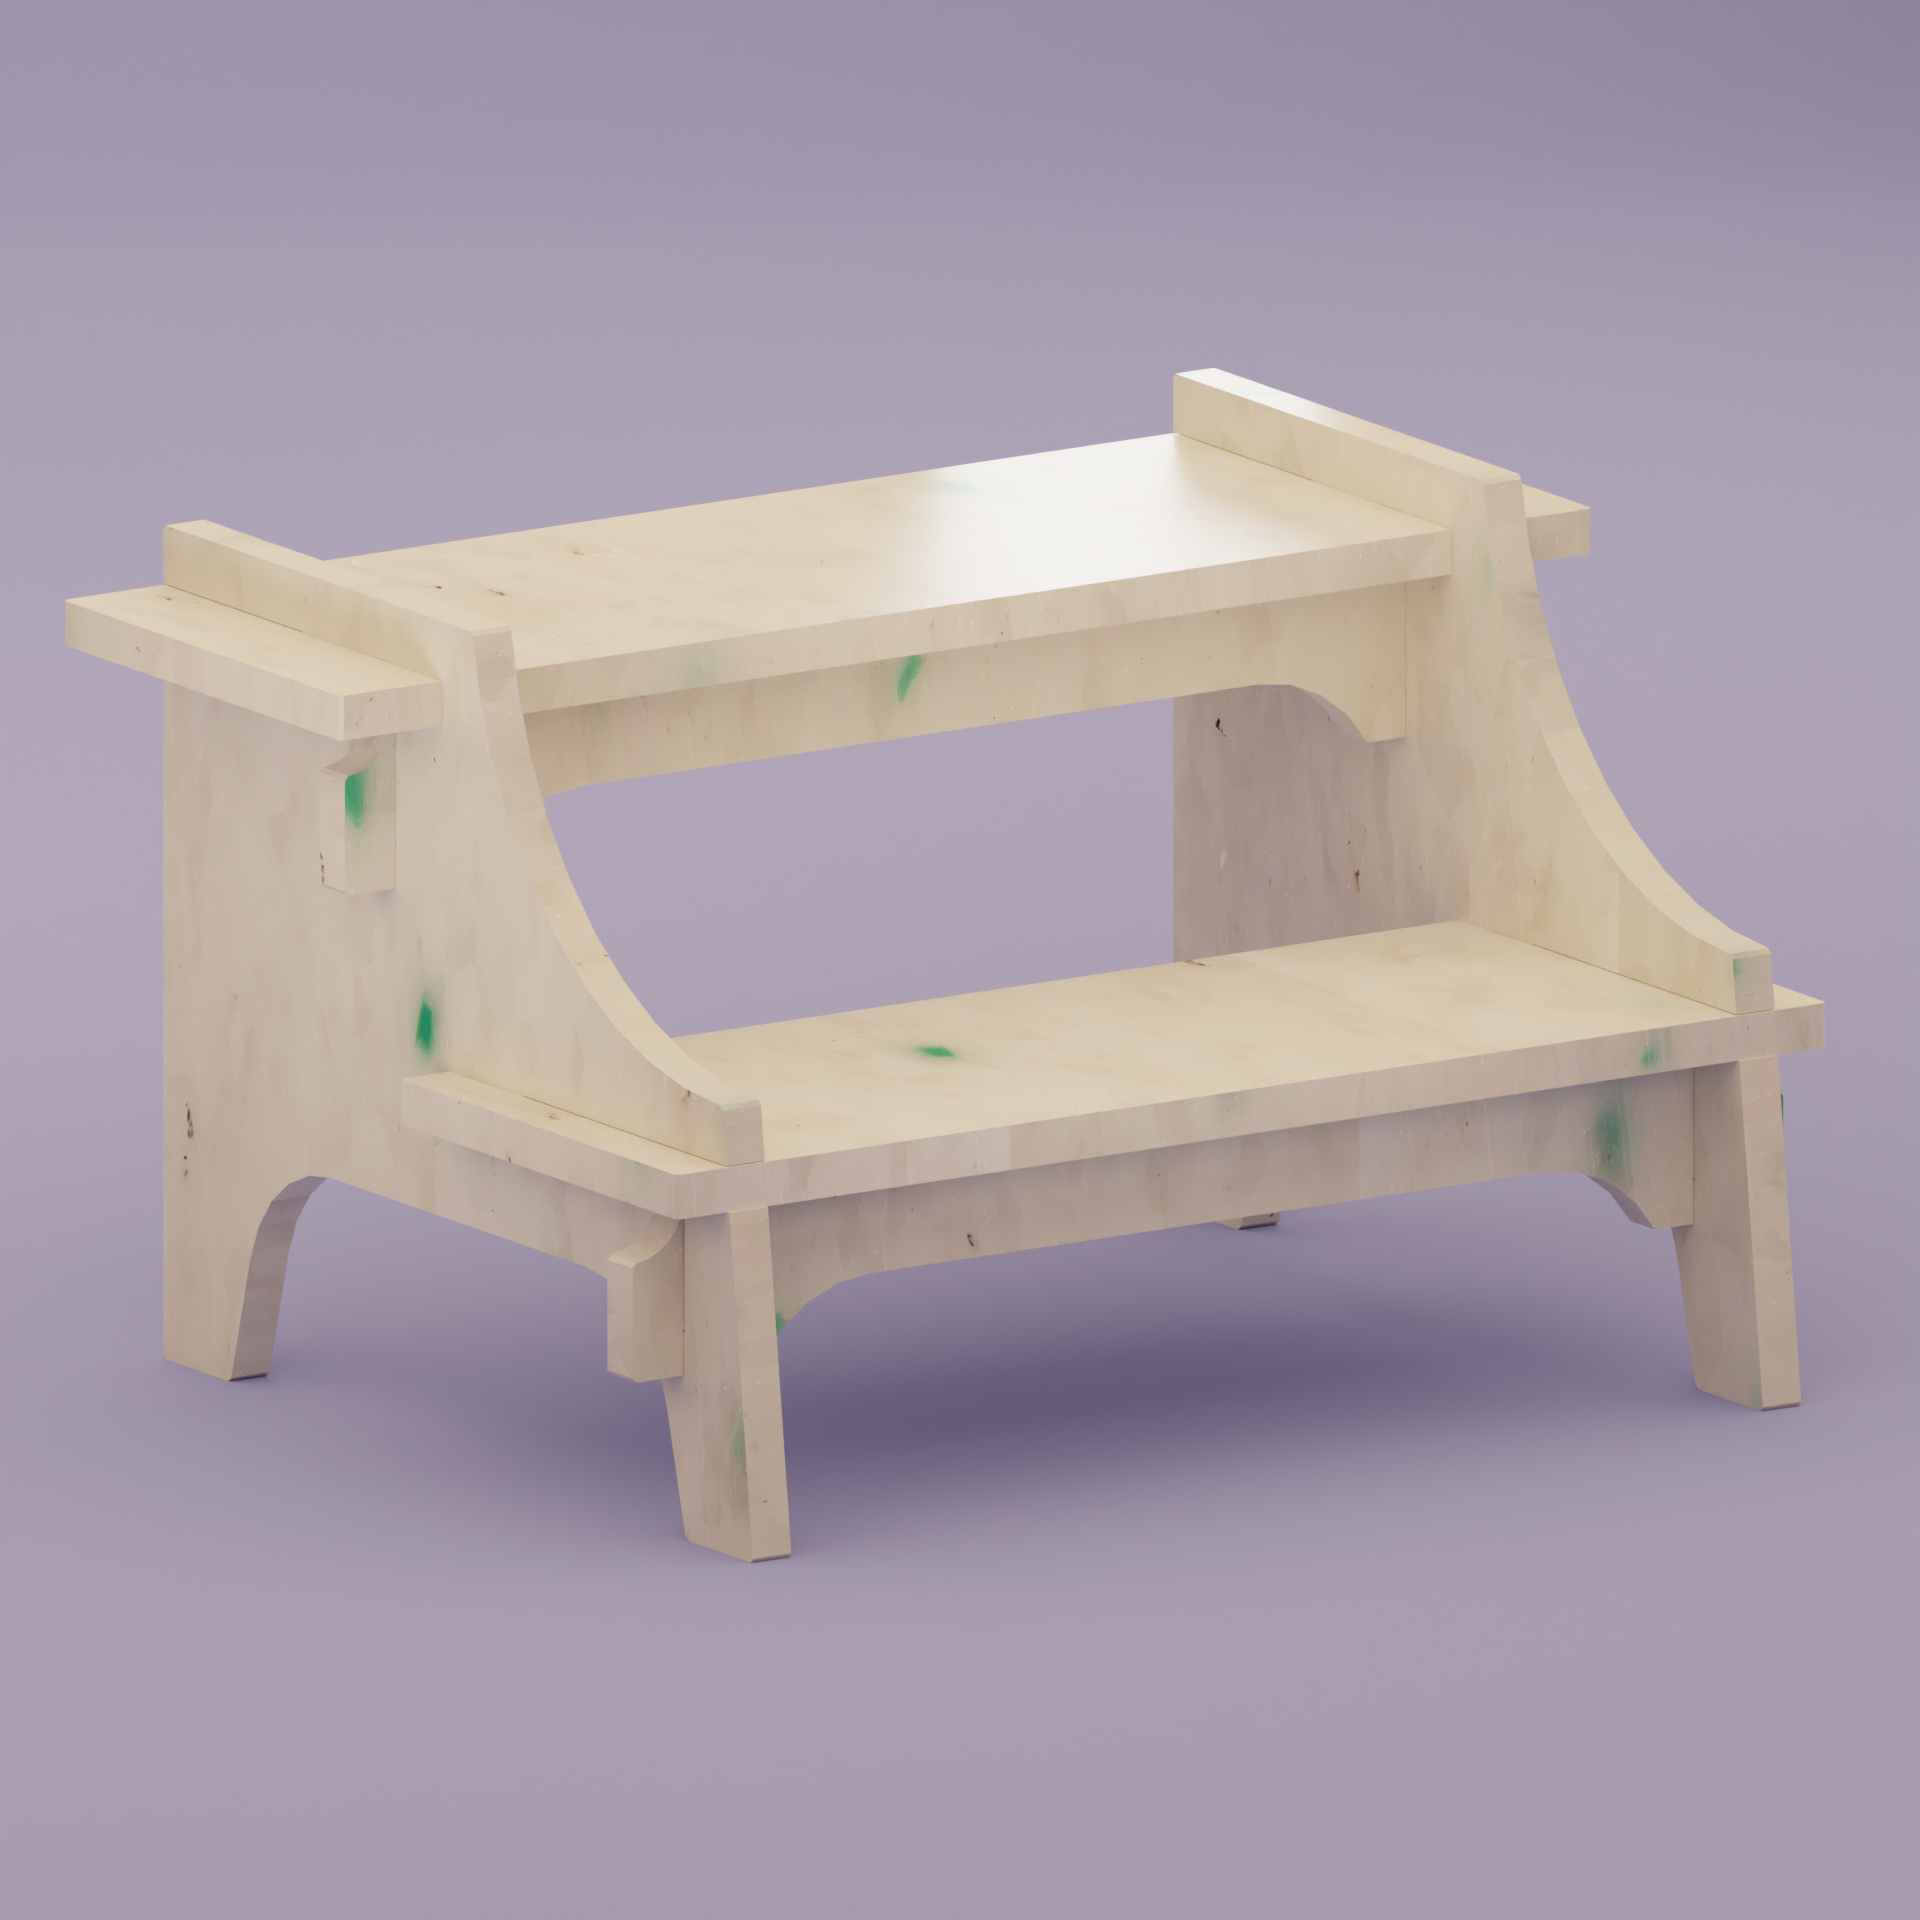 RENDER OF WHITE STEP STOOL BY THE MINIMONO PROJECT - BRAND FOR ECO FRIENDLY - PLAYFUL - MULTI FUNCTIONAL - SUSTAINABLE - HIGH QUALITY - DESIGN FURNITURE FROM RECYCLED PLASTIC FOR BOTH ADULT AND CHILDREN MADE IN BERLIN GERMANY